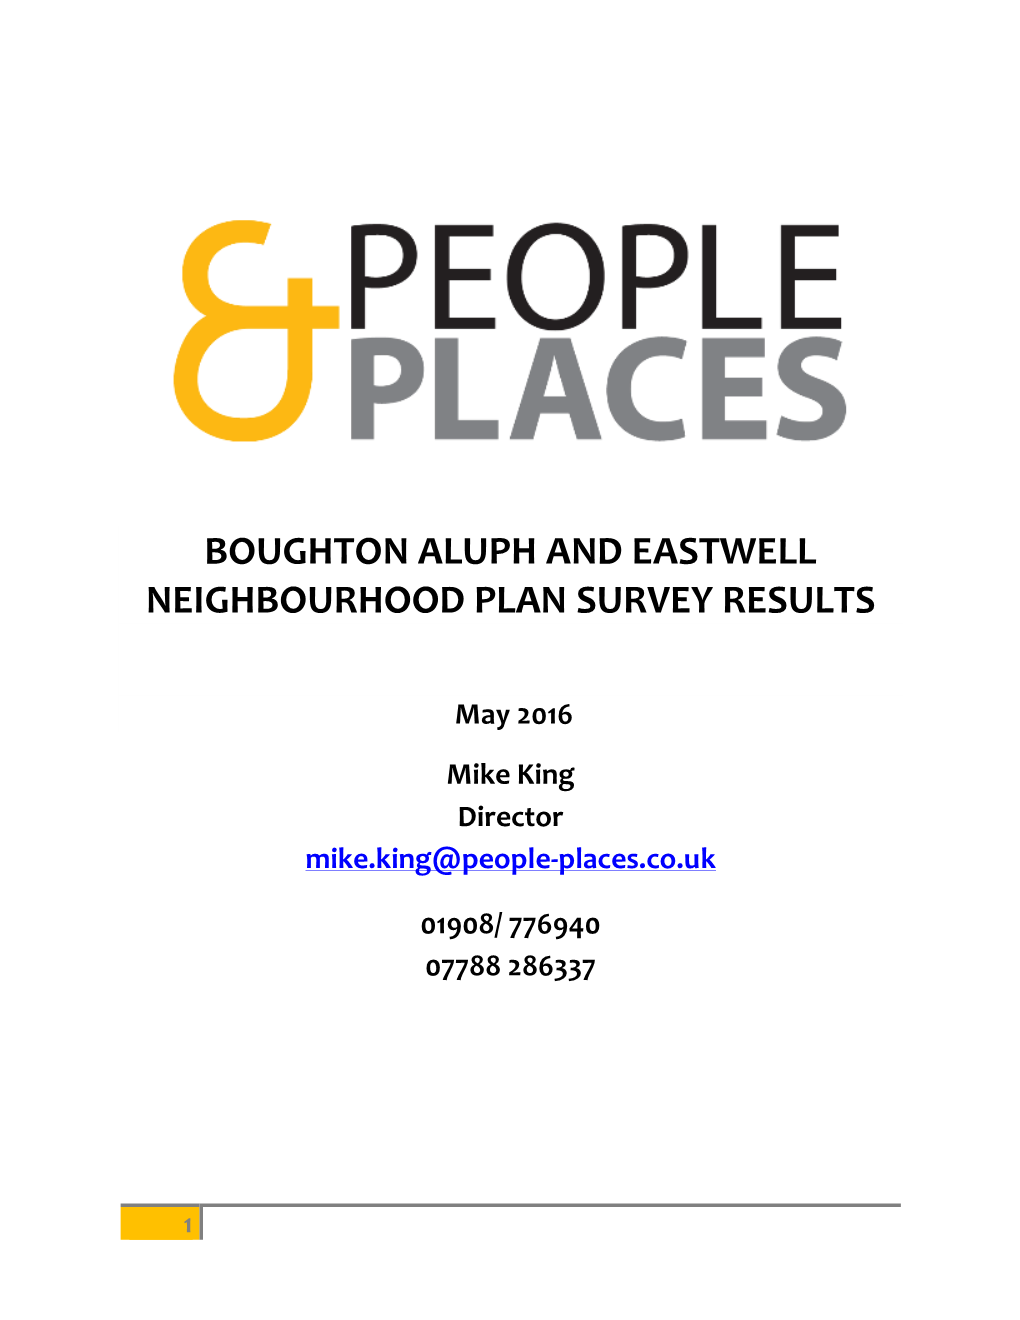 Boughton Aluph and Eastwell Neighbourhood Plan Survey Results